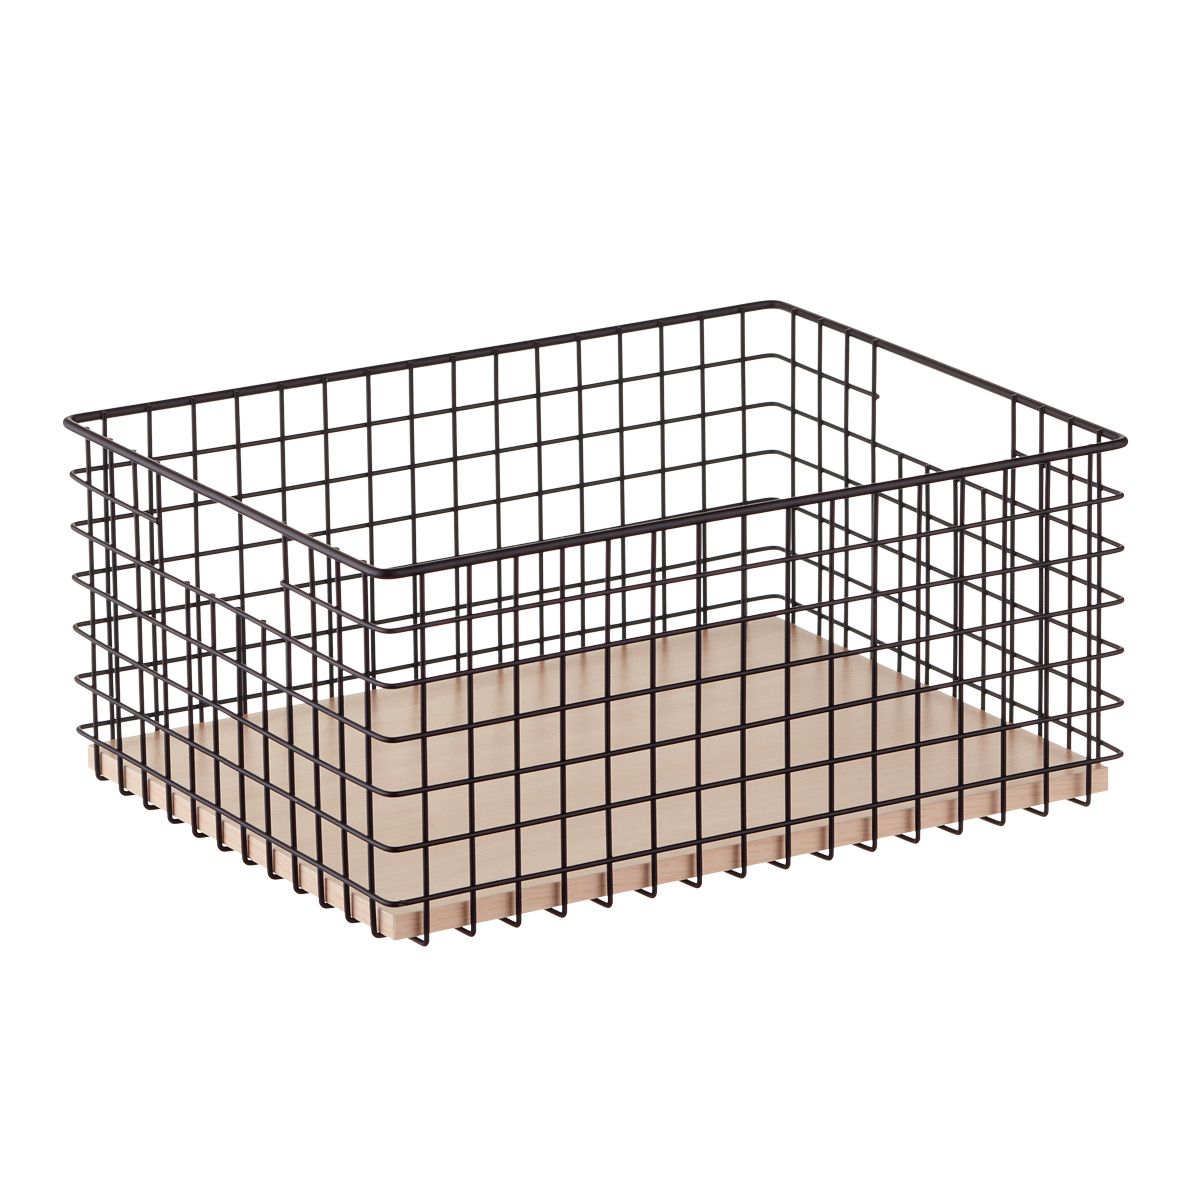 The Container Store Wide Maddox Wire Grid Bin Black | The Container Store